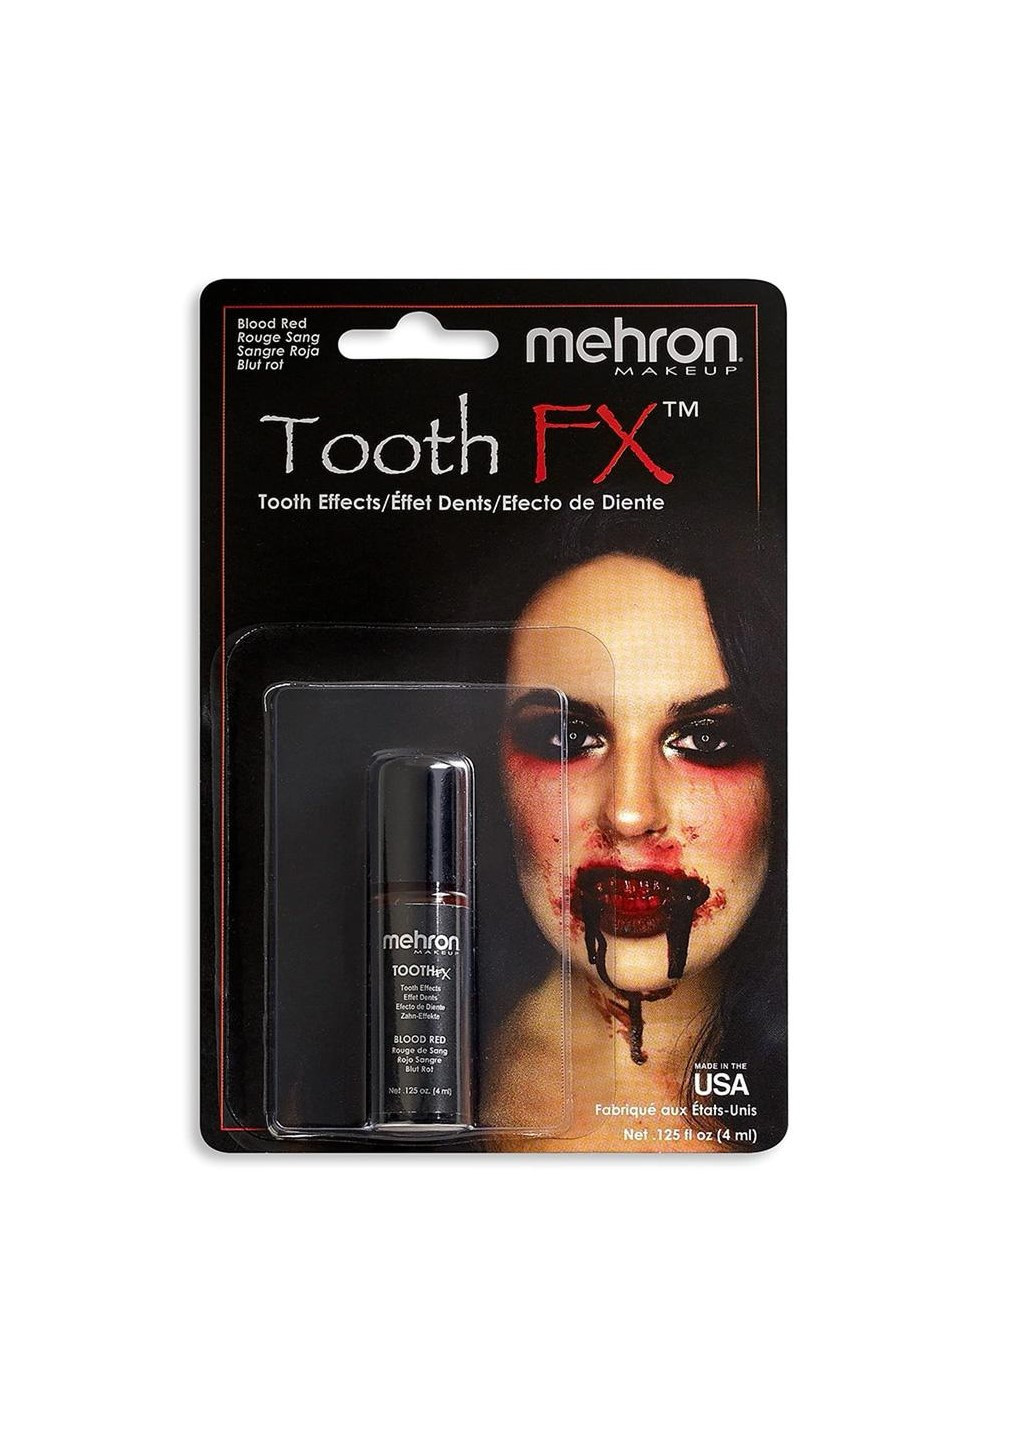 Medium tfx r Краска для зубов Tooth FX with Brush for Special Effects - Blood Red (Кровь), 4 мл Mehron (205593316)